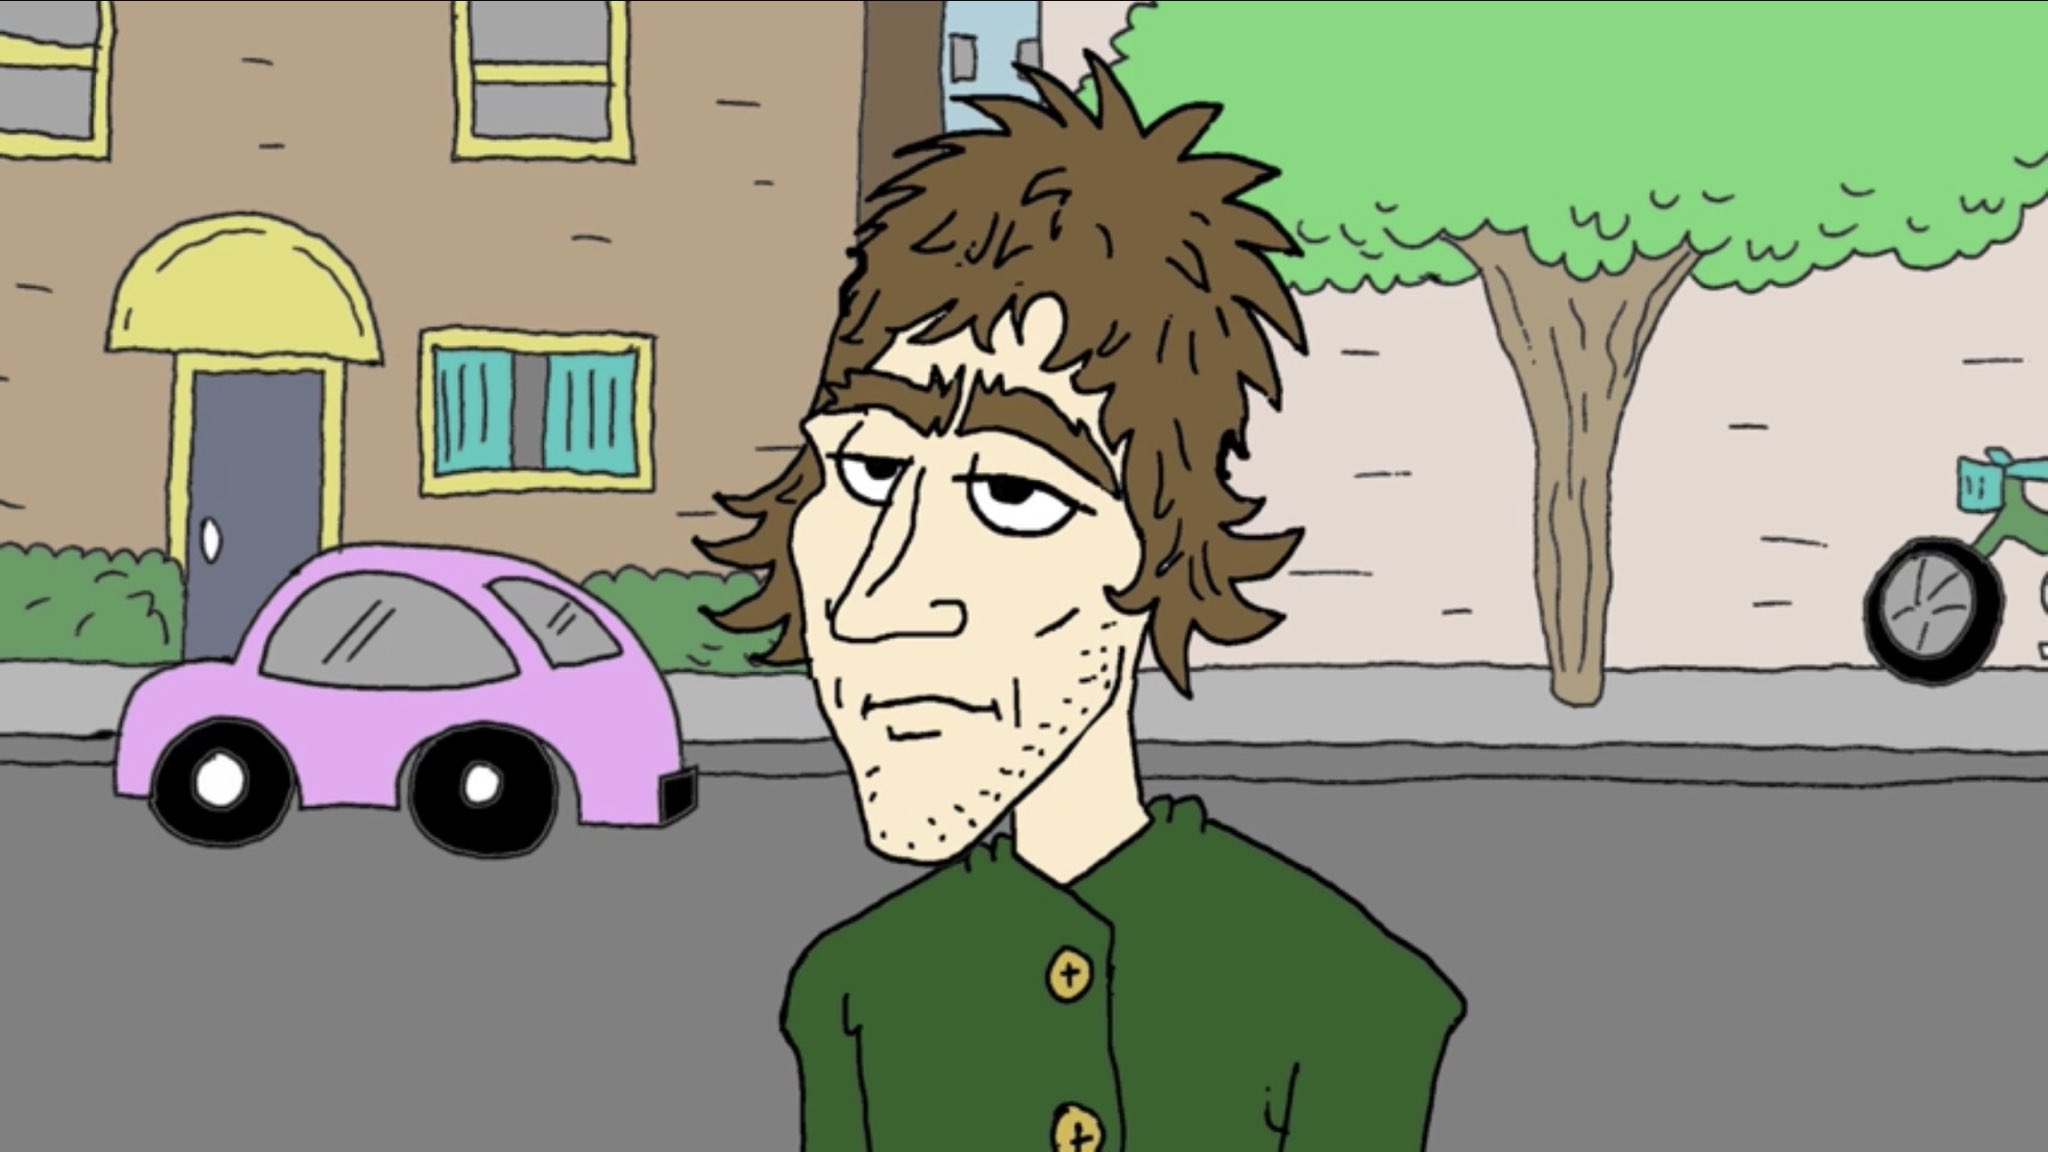 Happy Birthday Liam Gallagher! Here s a cartoon I made for him.  